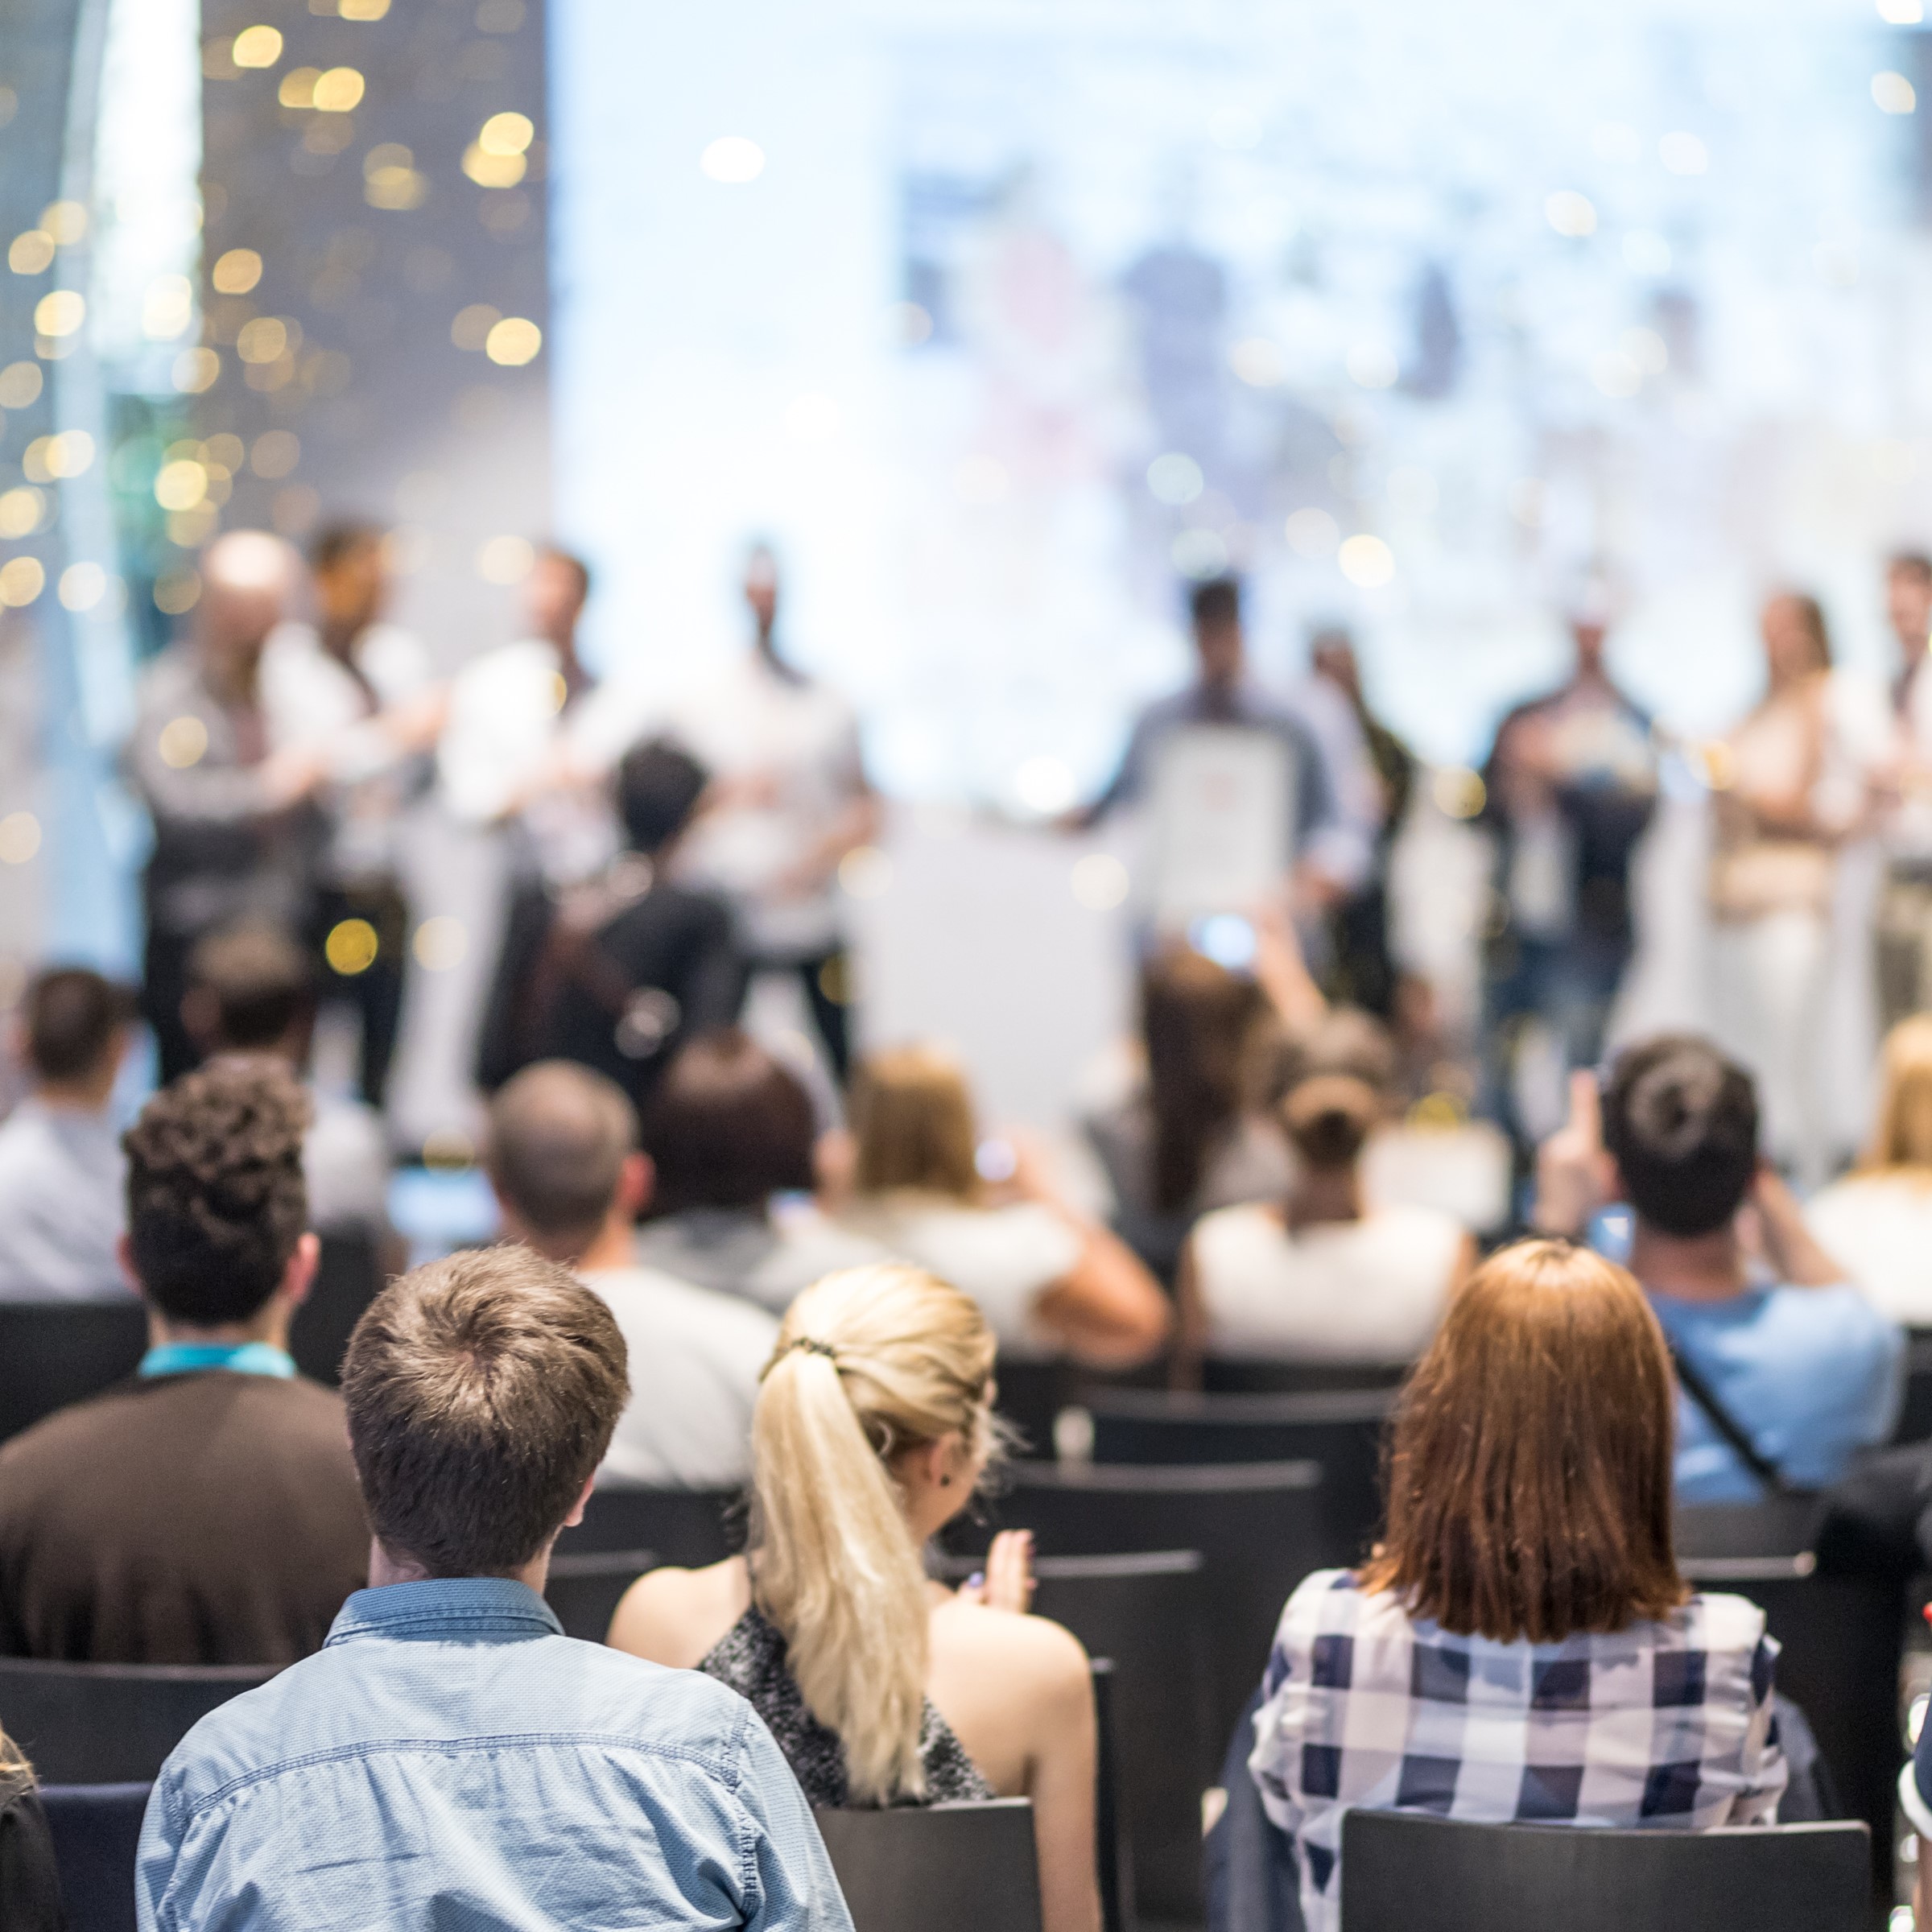 Stock image of crowd looking at people on a stage